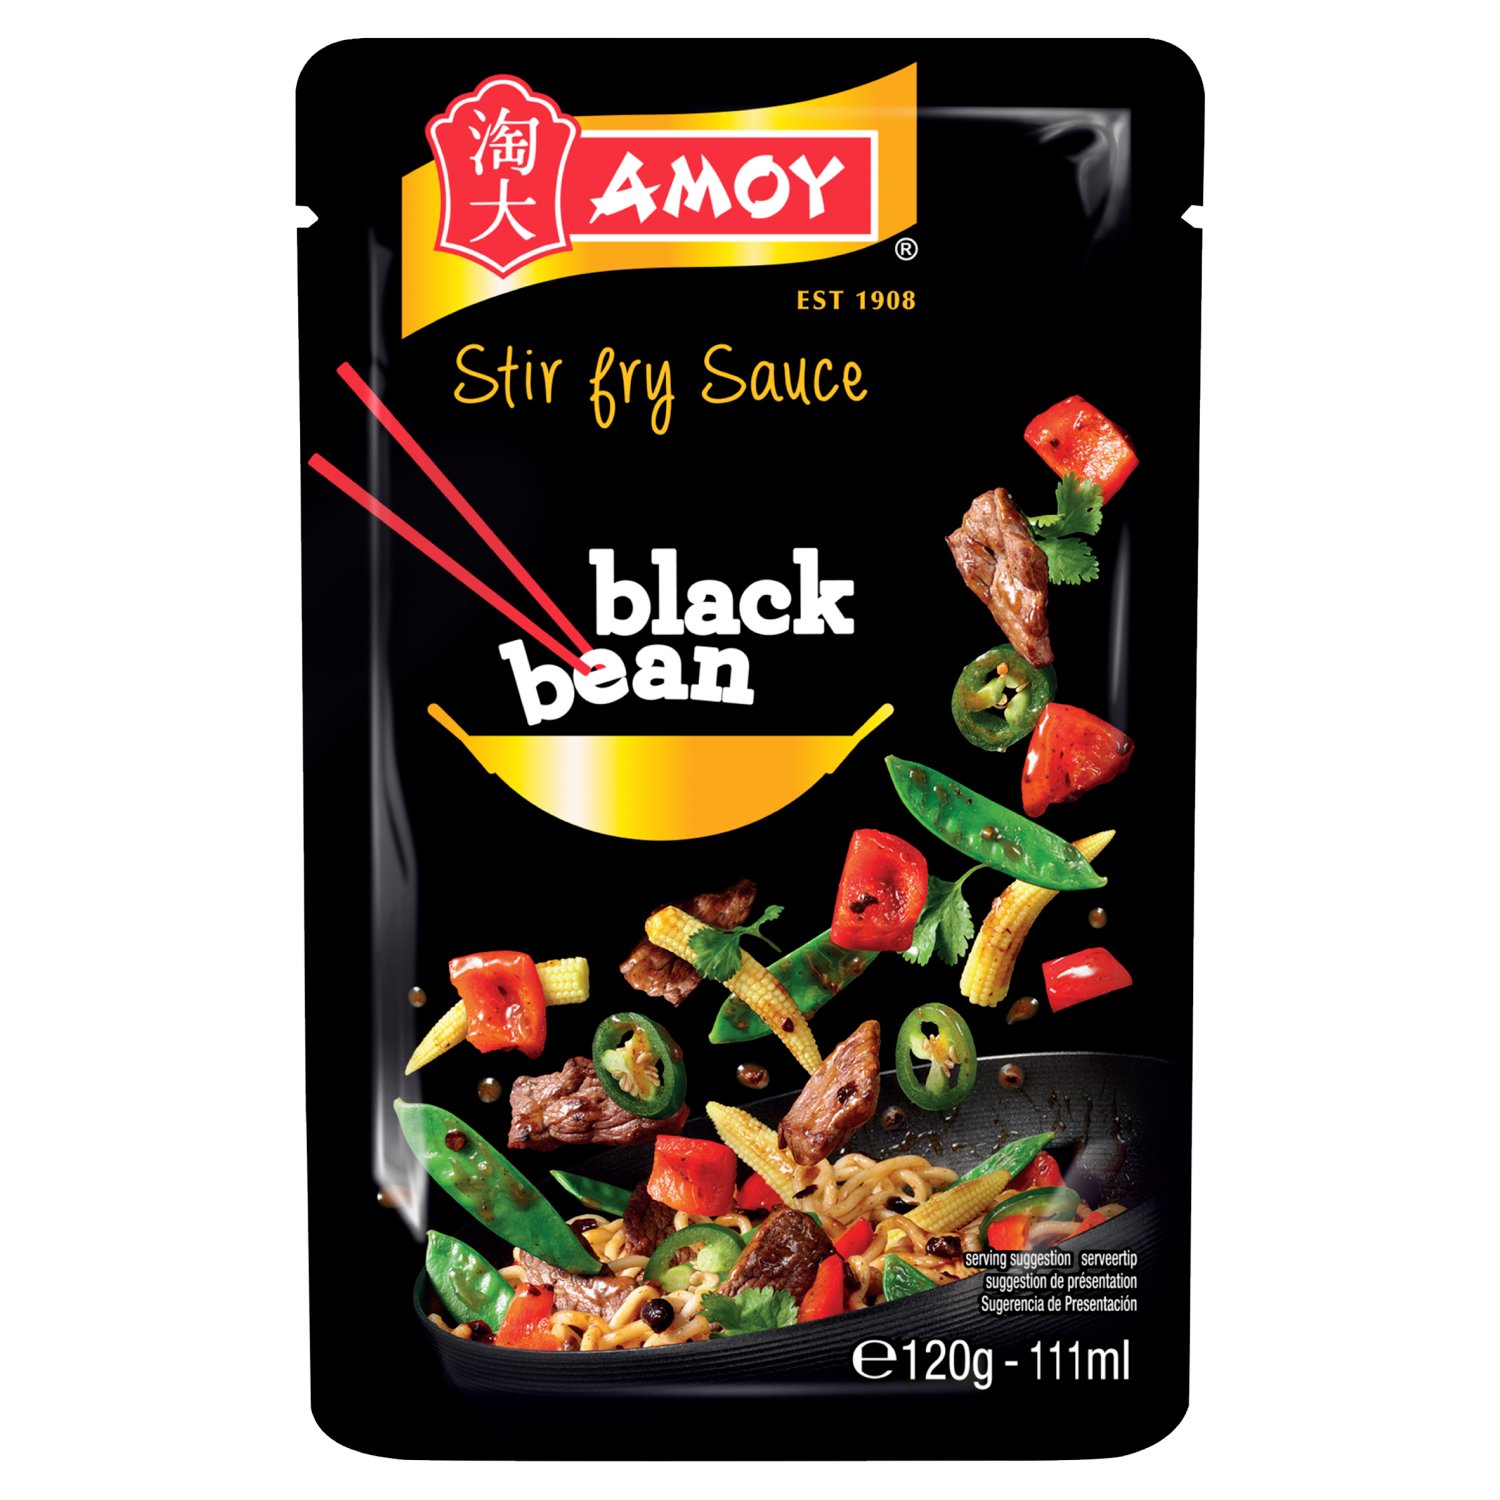 Liven up your stir fry!
These inspiring flavours bring your stir fry to life.
Rich savoury flavour with fermented black soy beans, aromatic ginger, shallots and garlic.